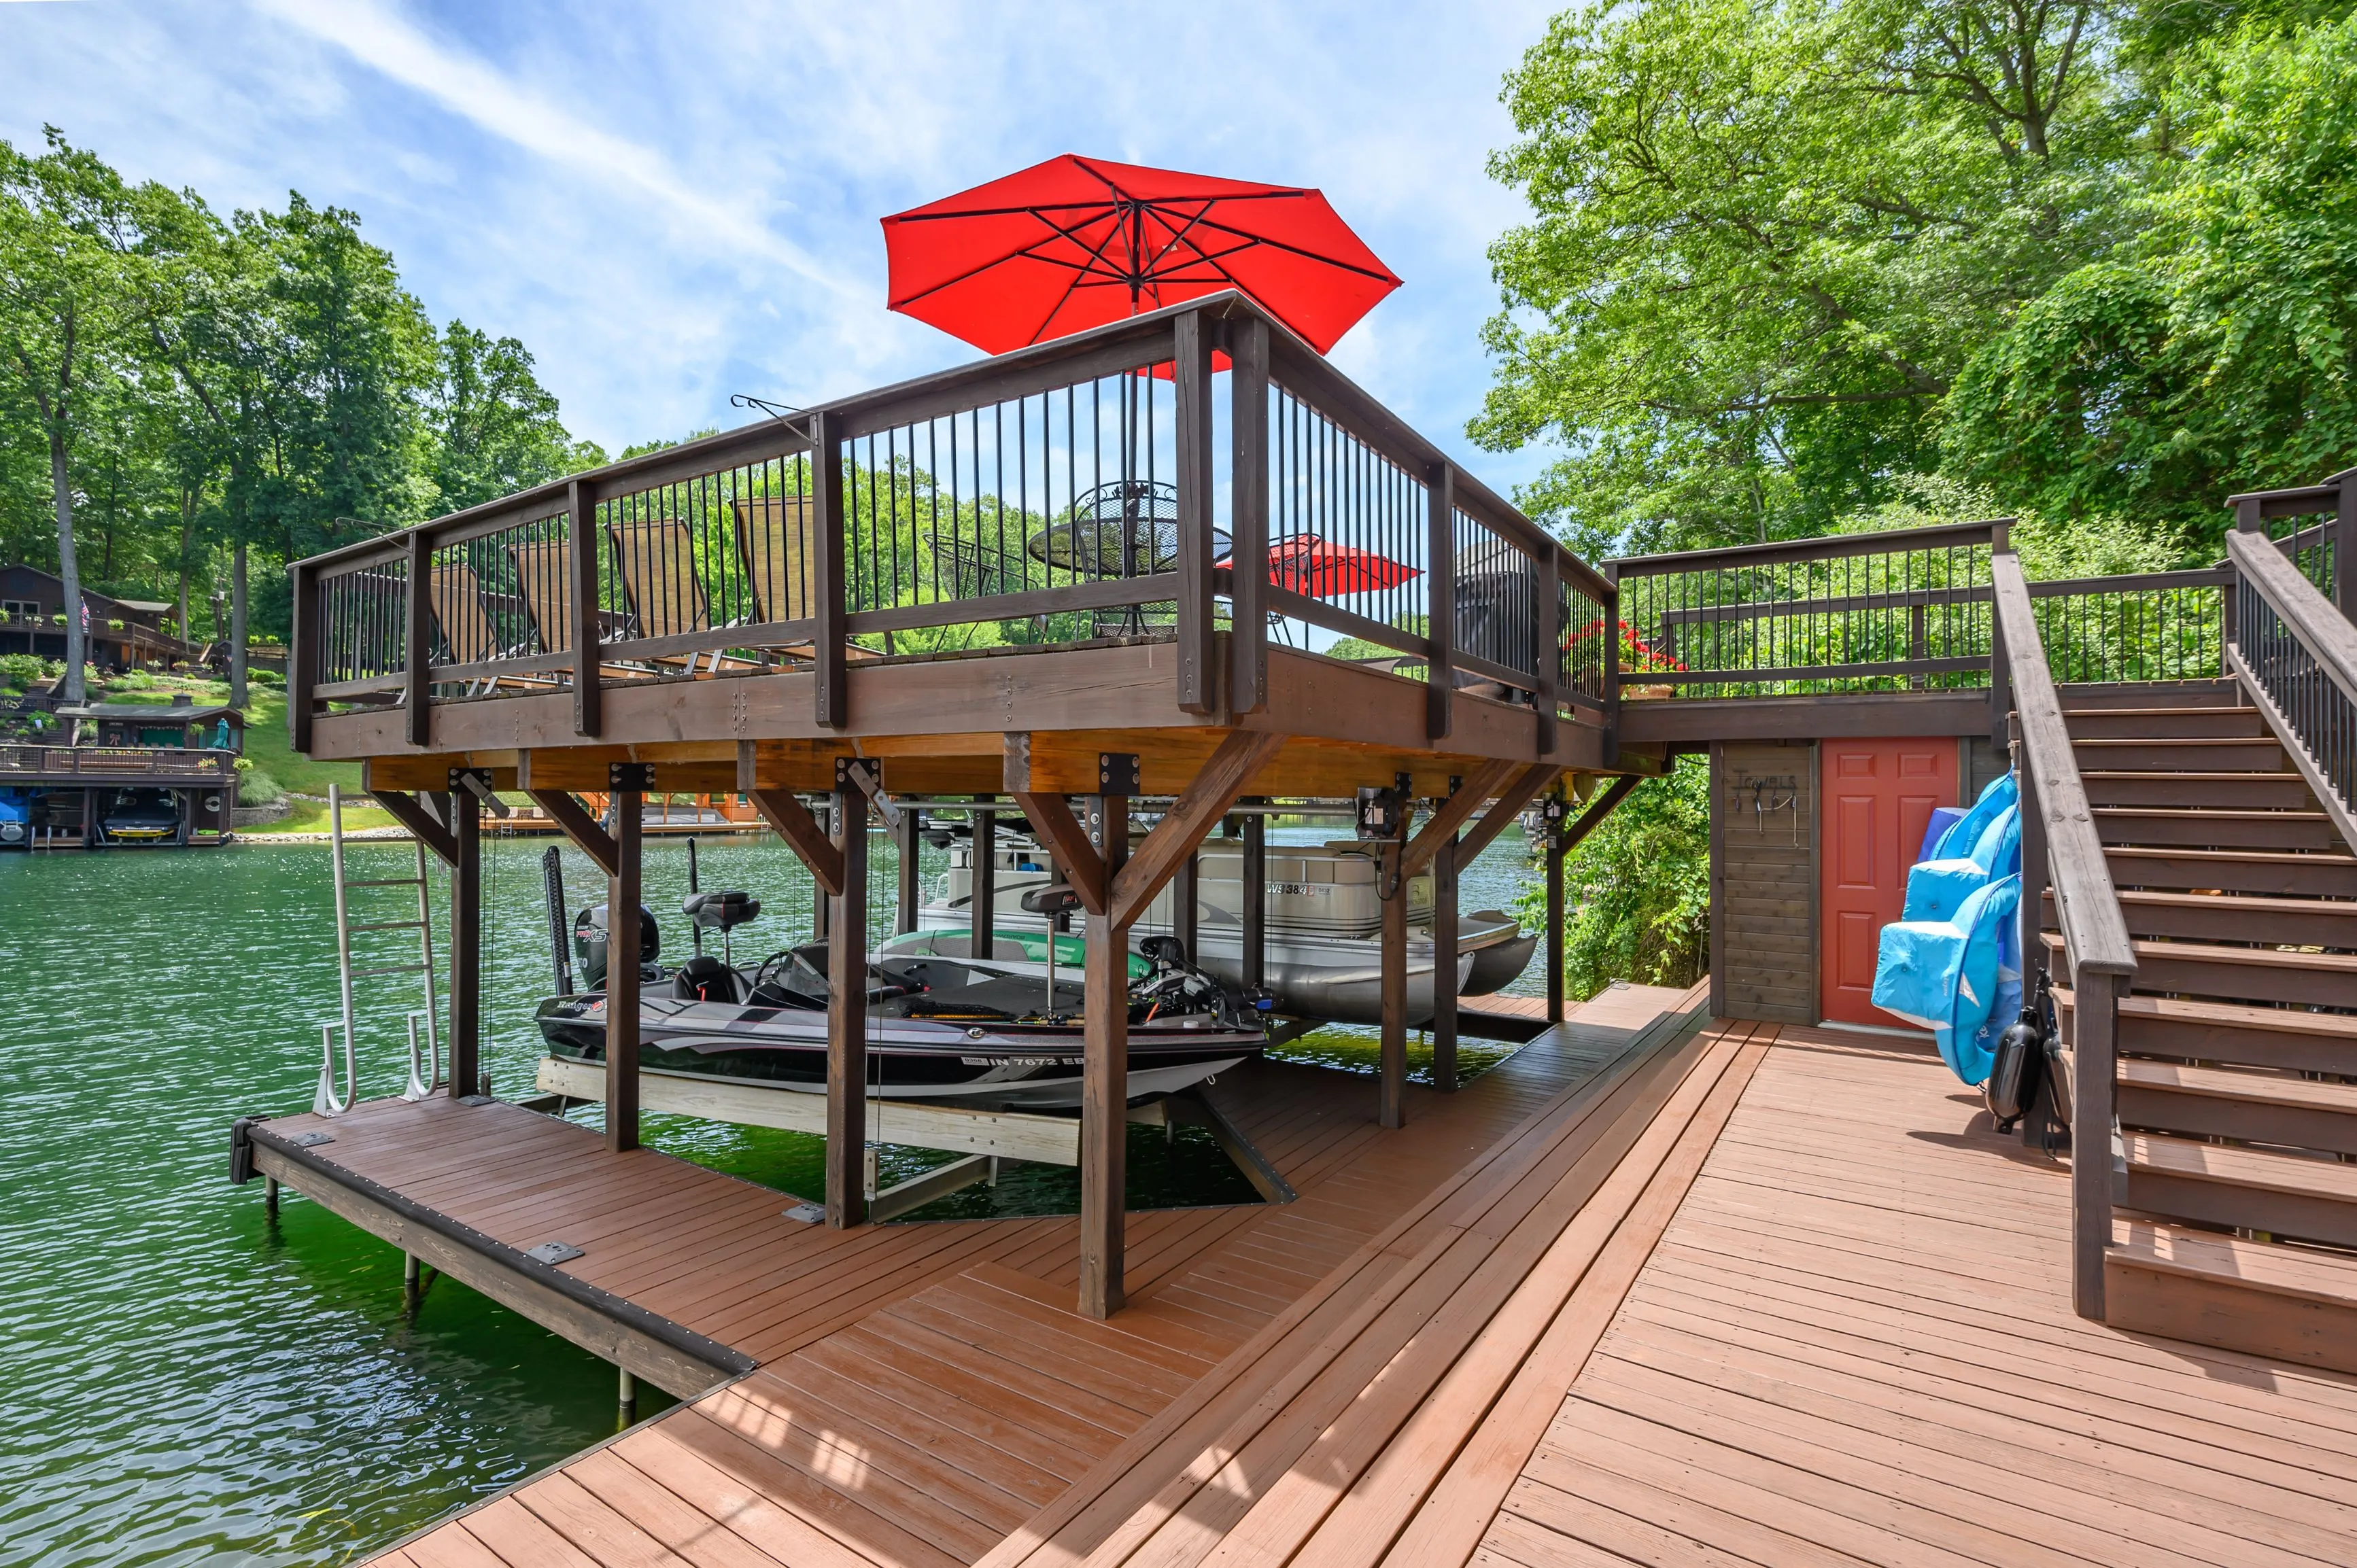 Lakeside wooden deck with a boat dock underneath an elevated patio area with metal railings and a red umbrella on a sunny day.